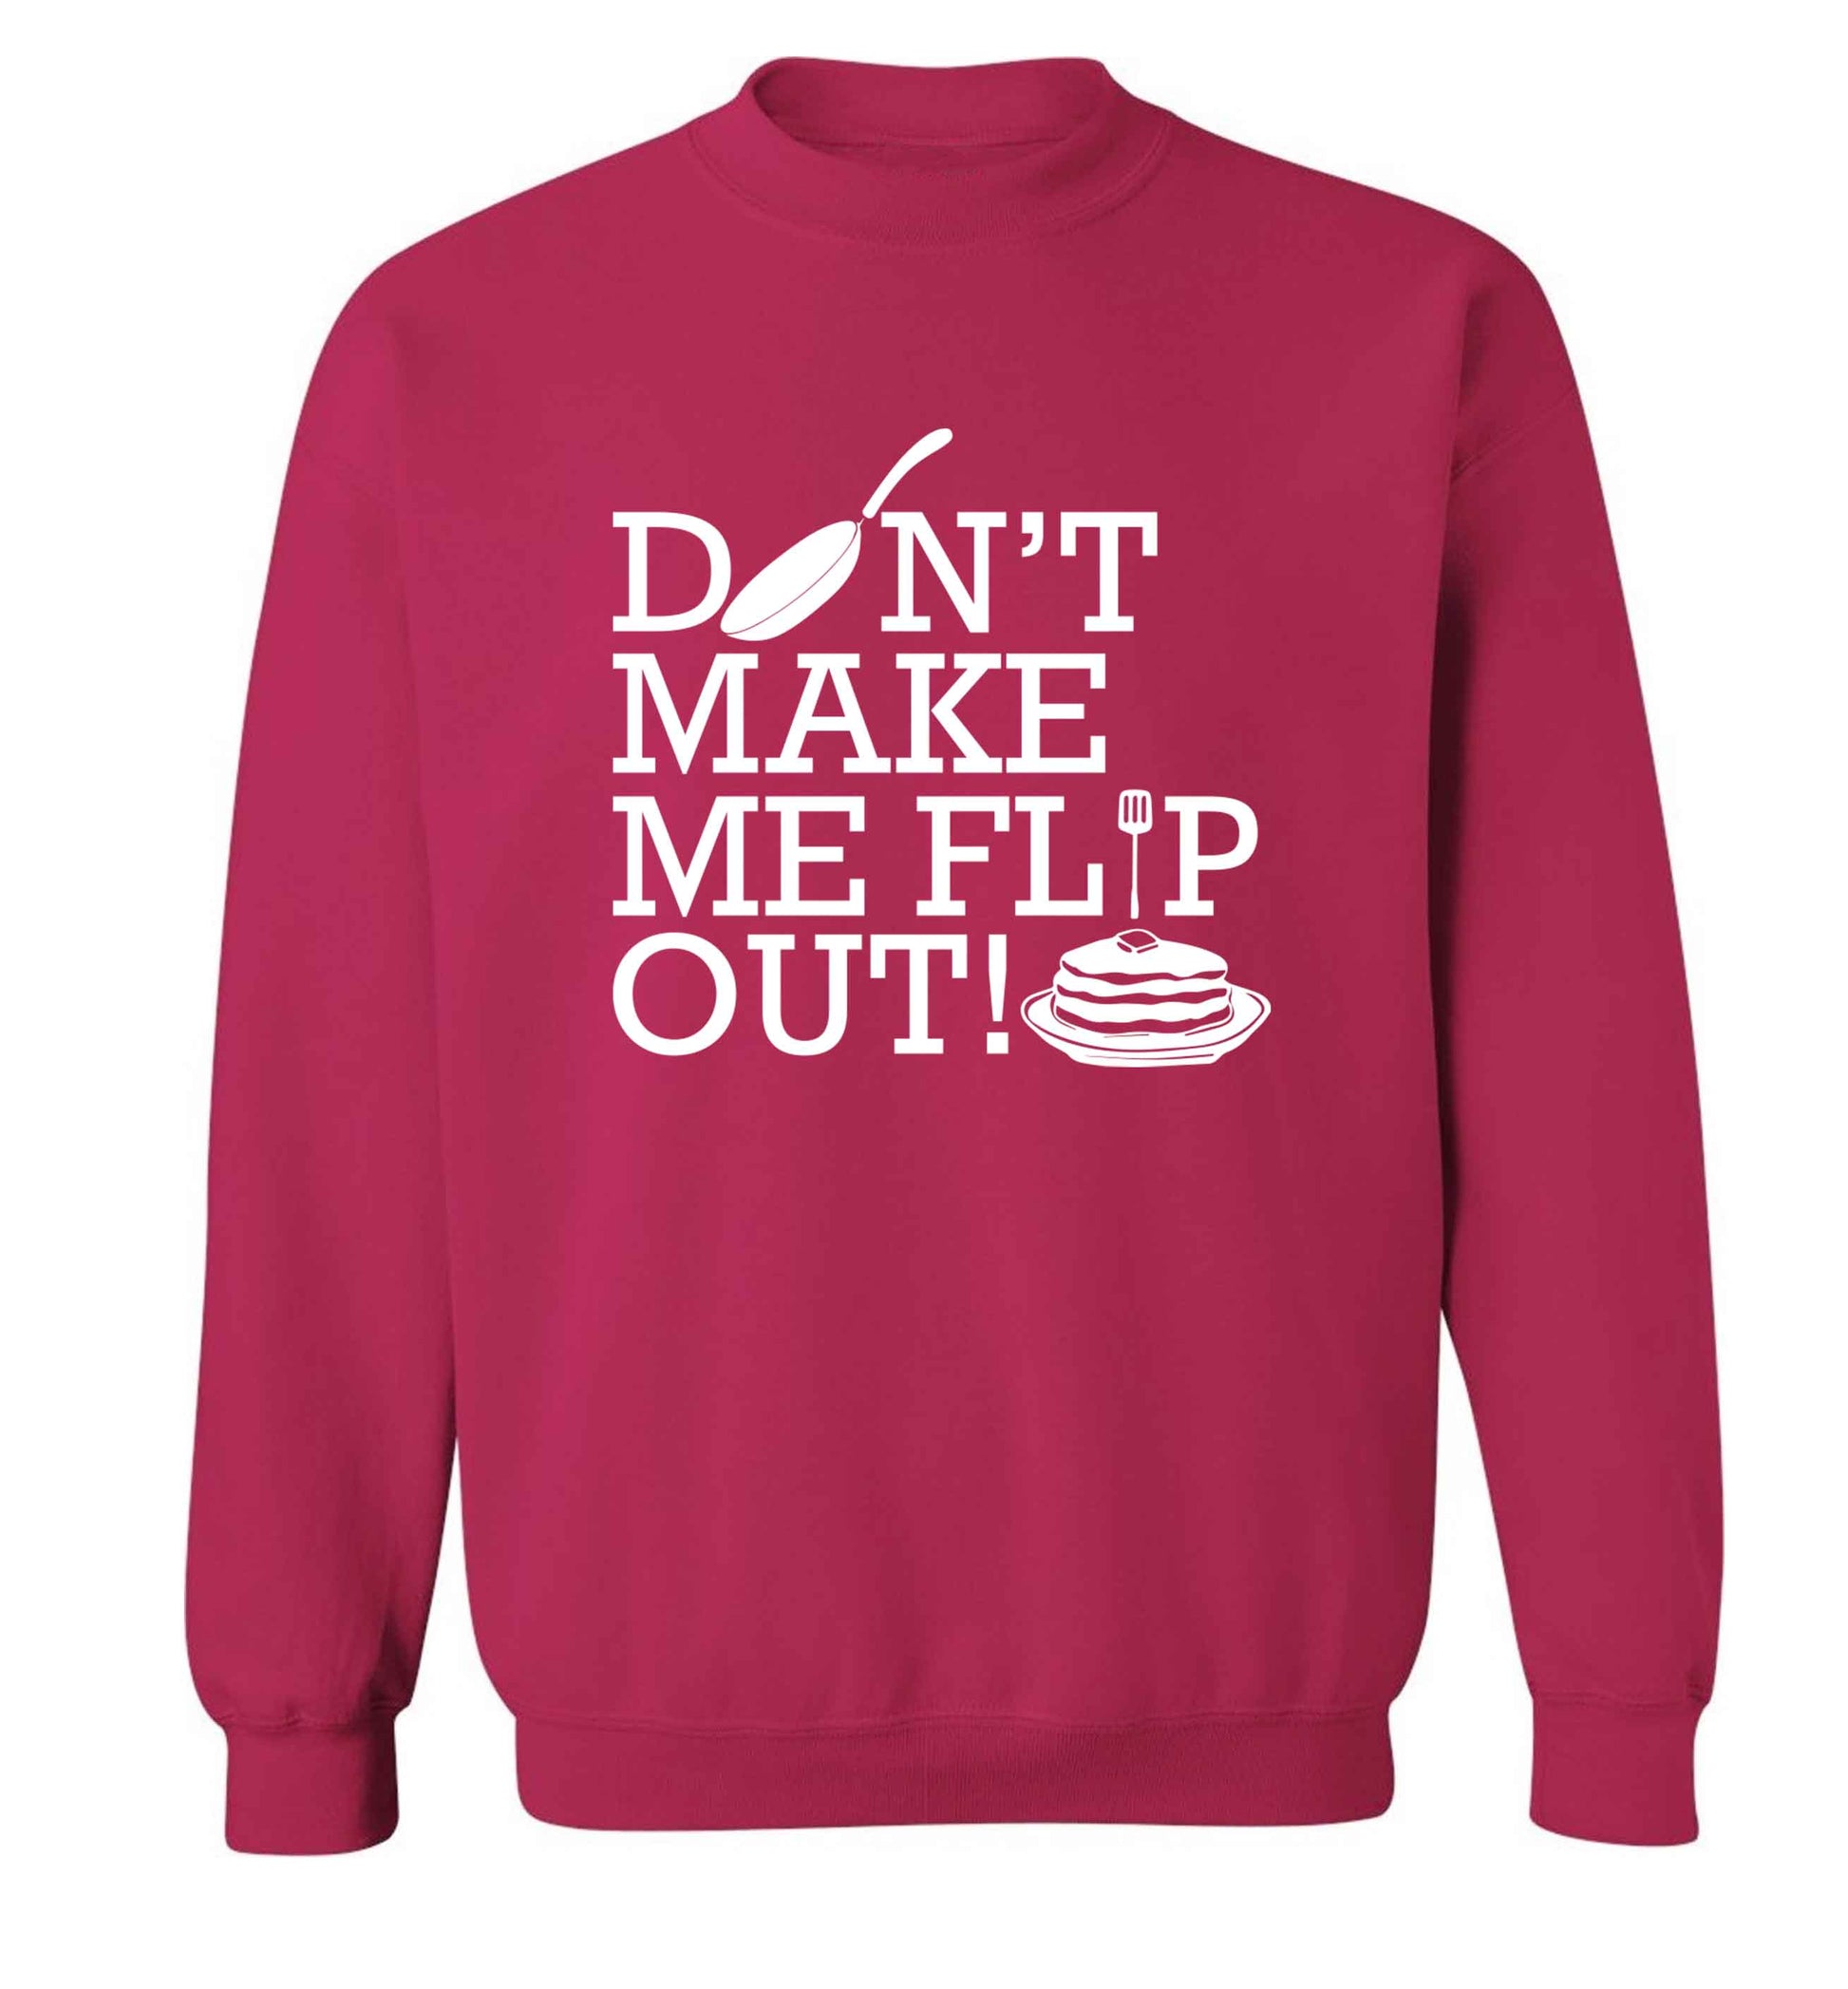 Don't make me flip out adult's unisex pink sweater 2XL